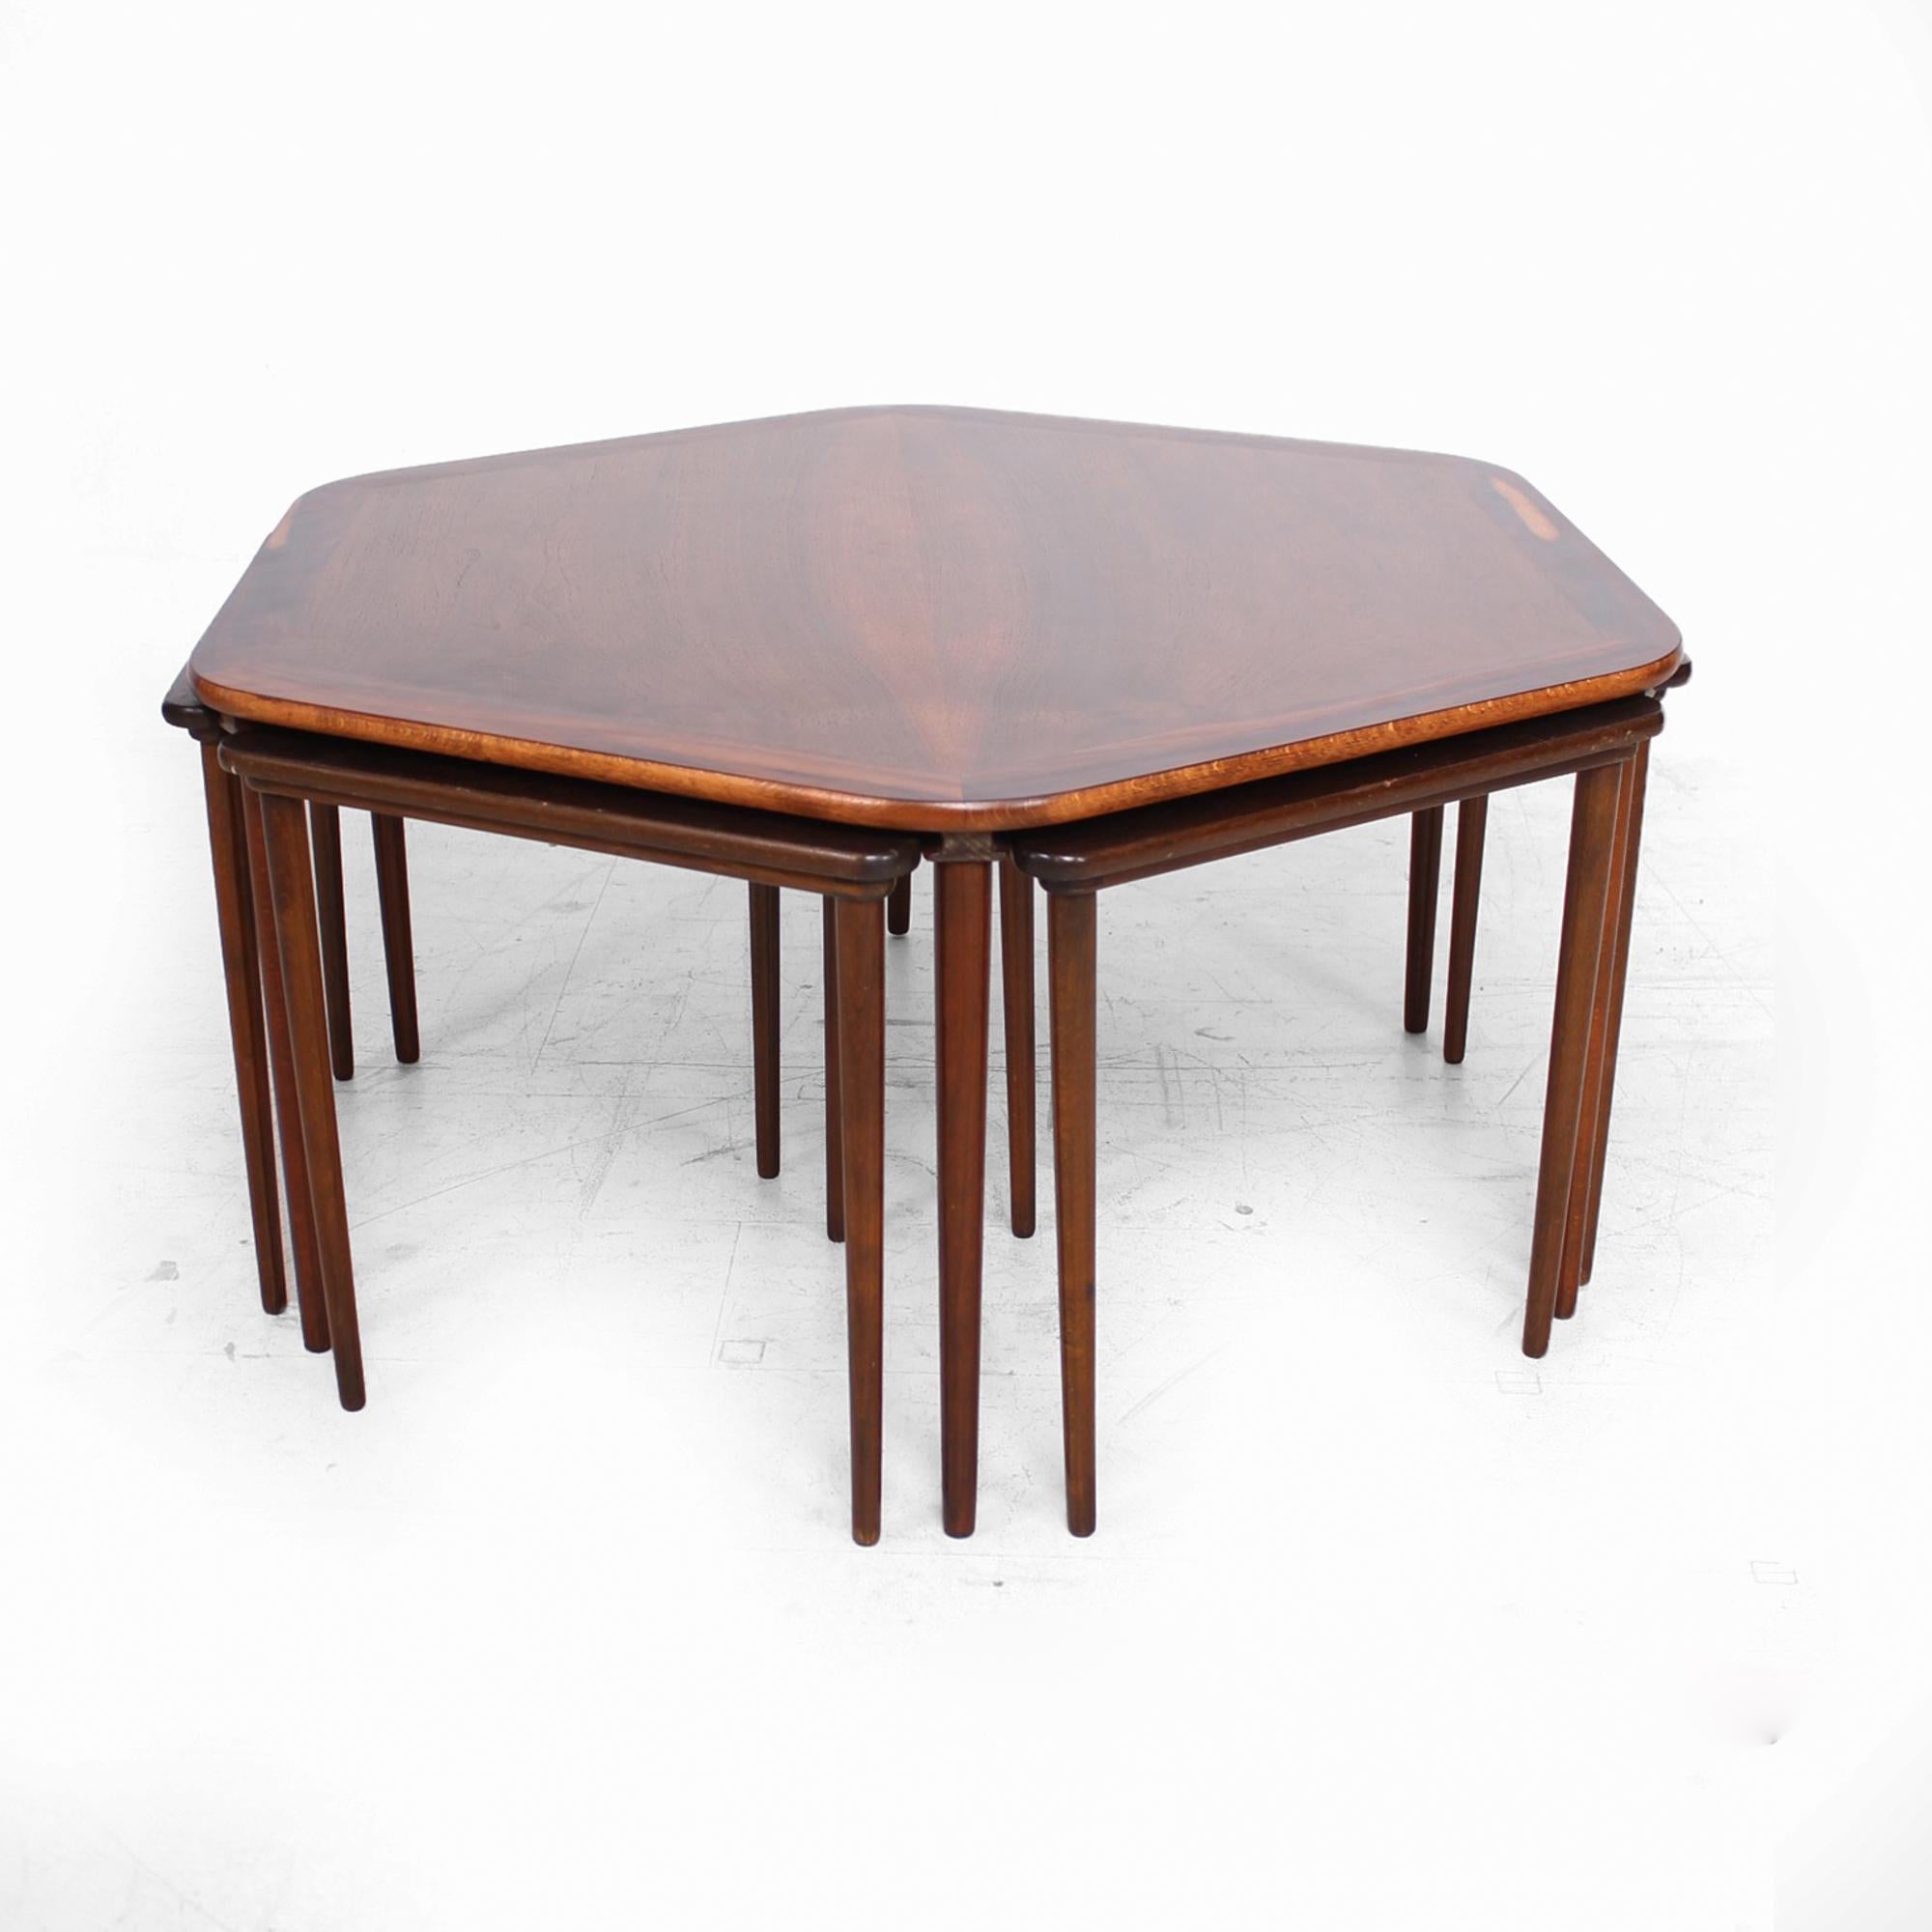 AMBIANIC offering:
Fantastic set of six rosewood nesting tables under a hexagonal rosewood coffee table. 
Made in Denmark 1950s
The coffee table is hexagonal with 6 nesting tables. Set includes 7 pieces.
Overall dimensions: 17.38 tall x 34.13 depth